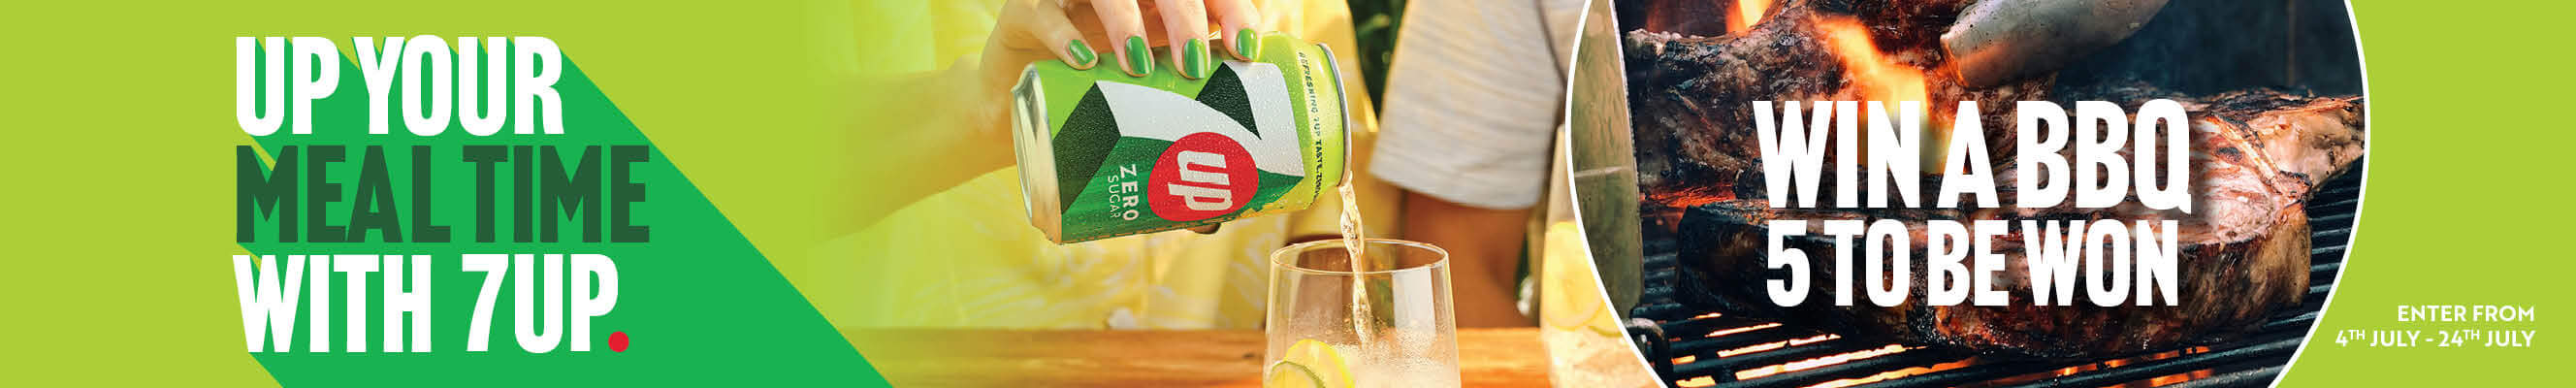 Win a bbq with 7up